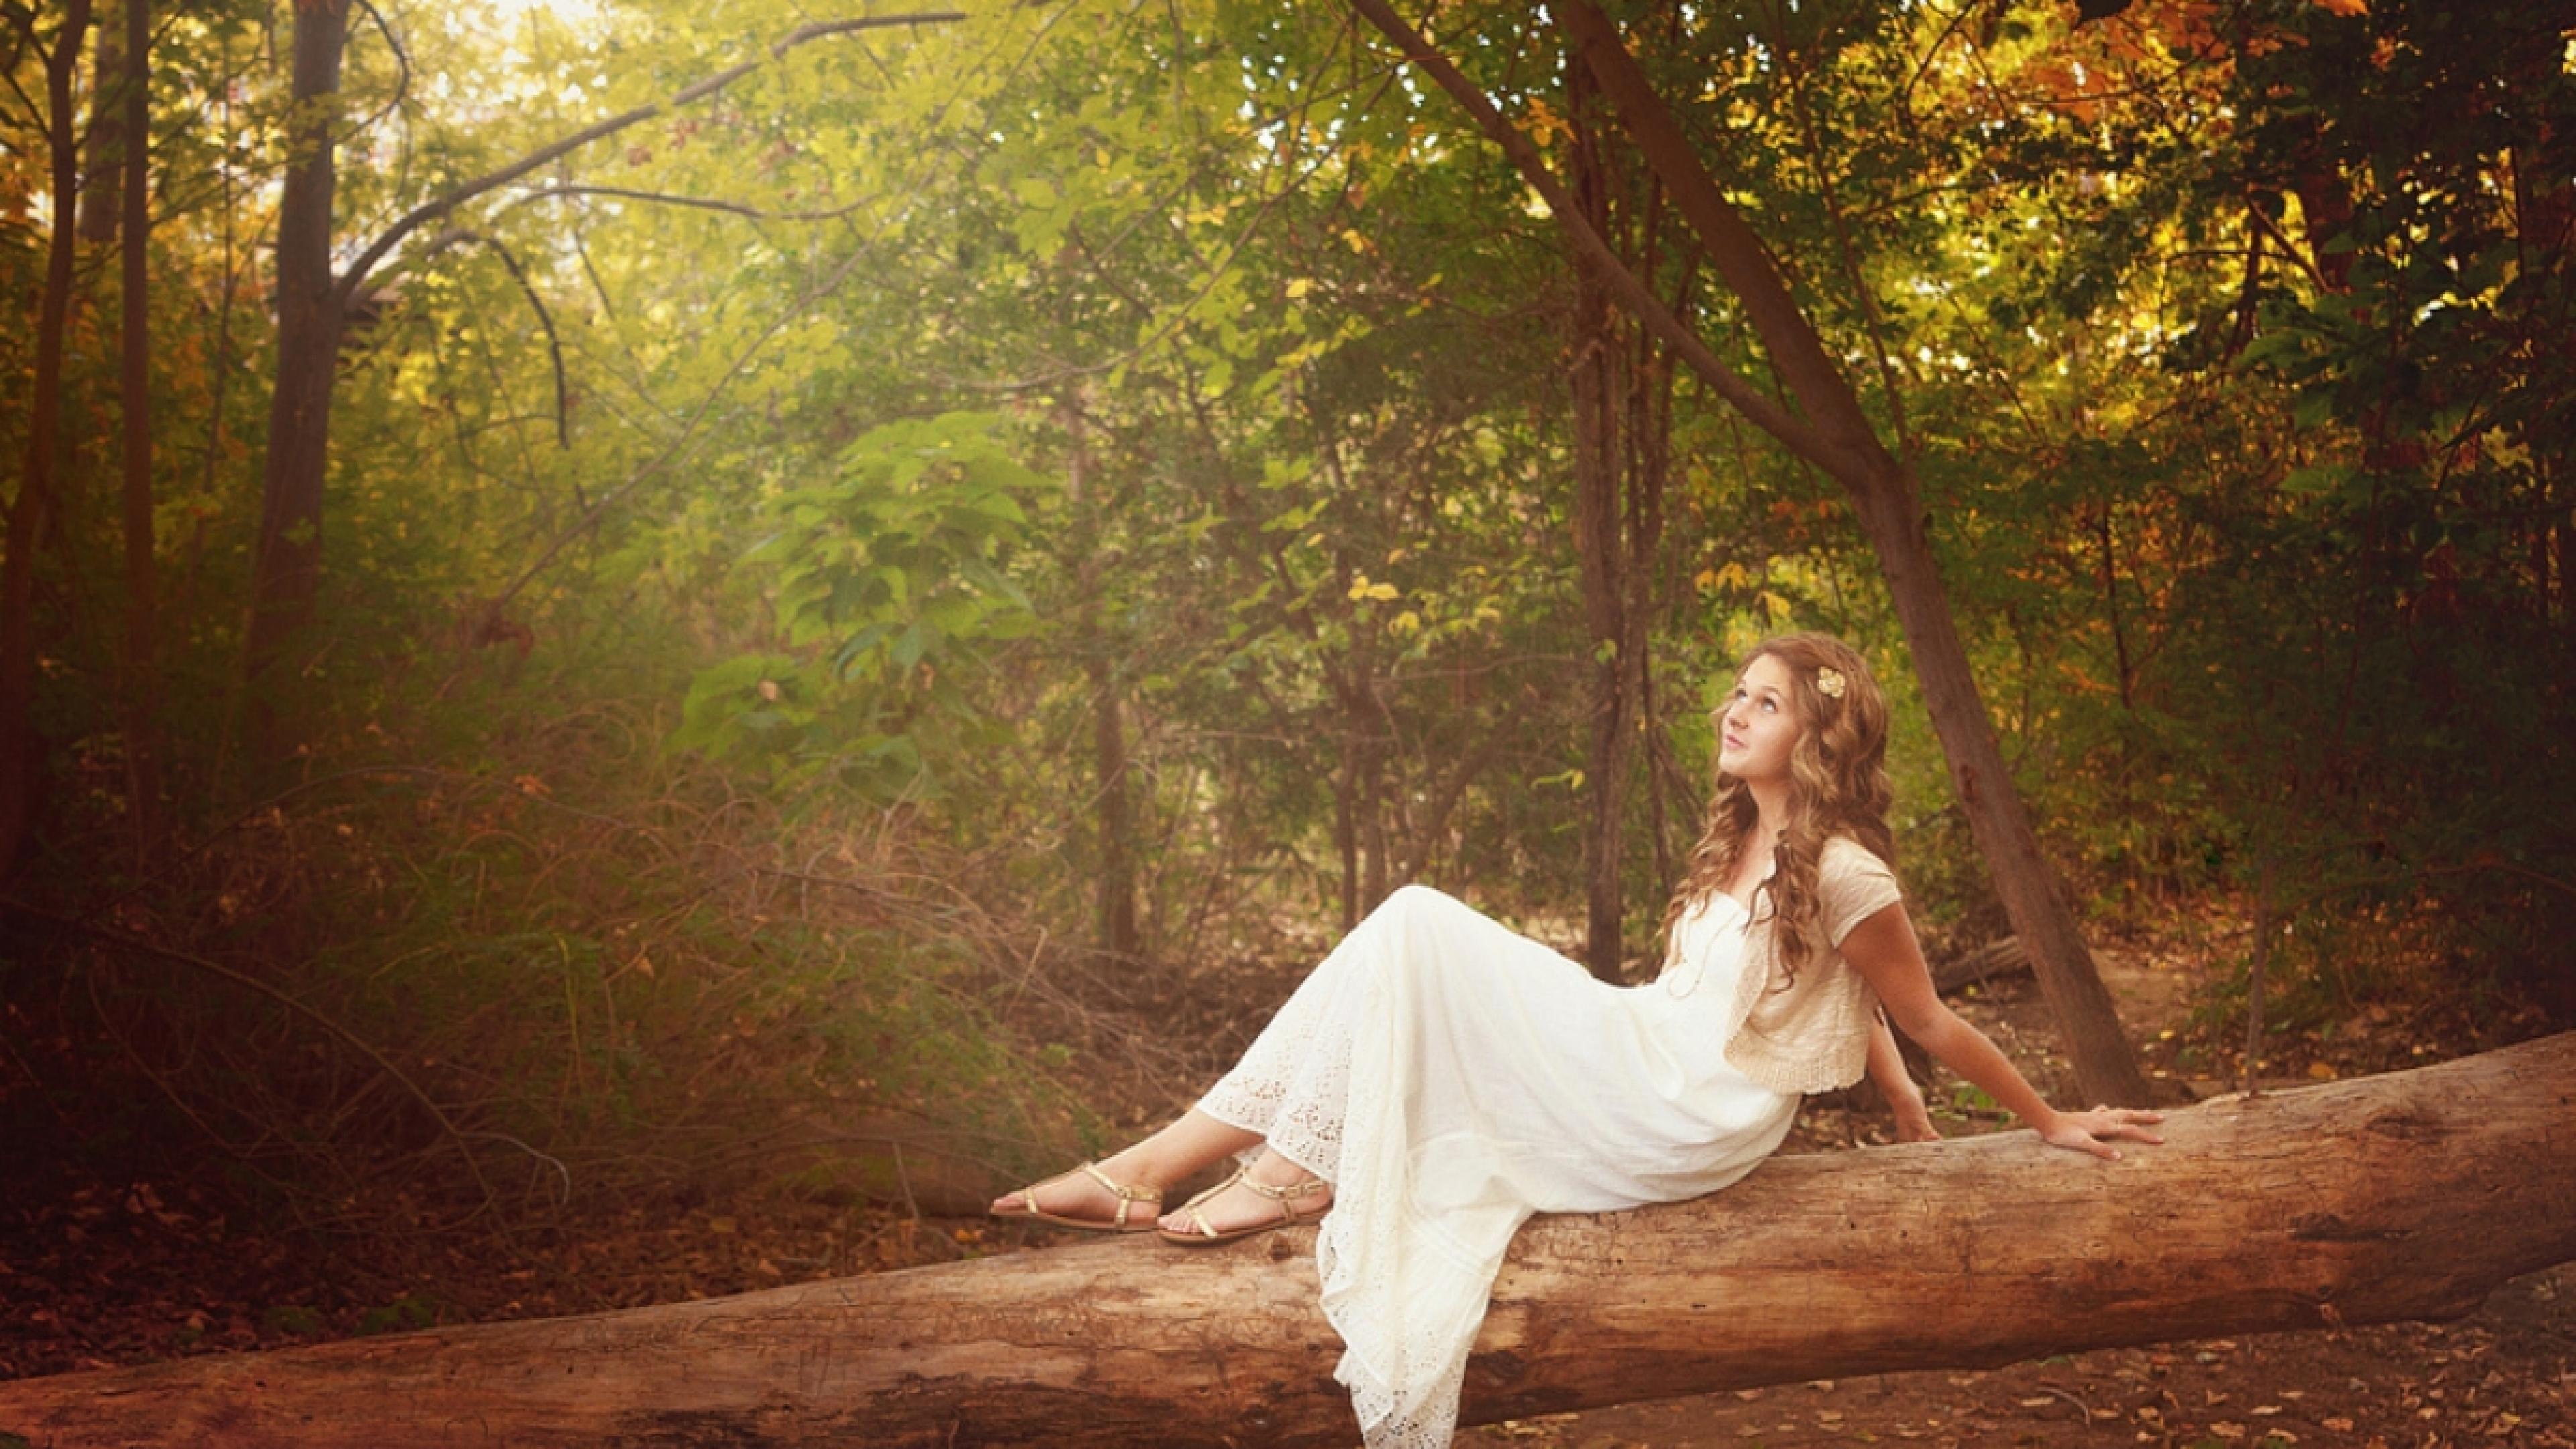 Pretty Girl In The Forest Wallpaper Full HD m68z 3840x2160 px